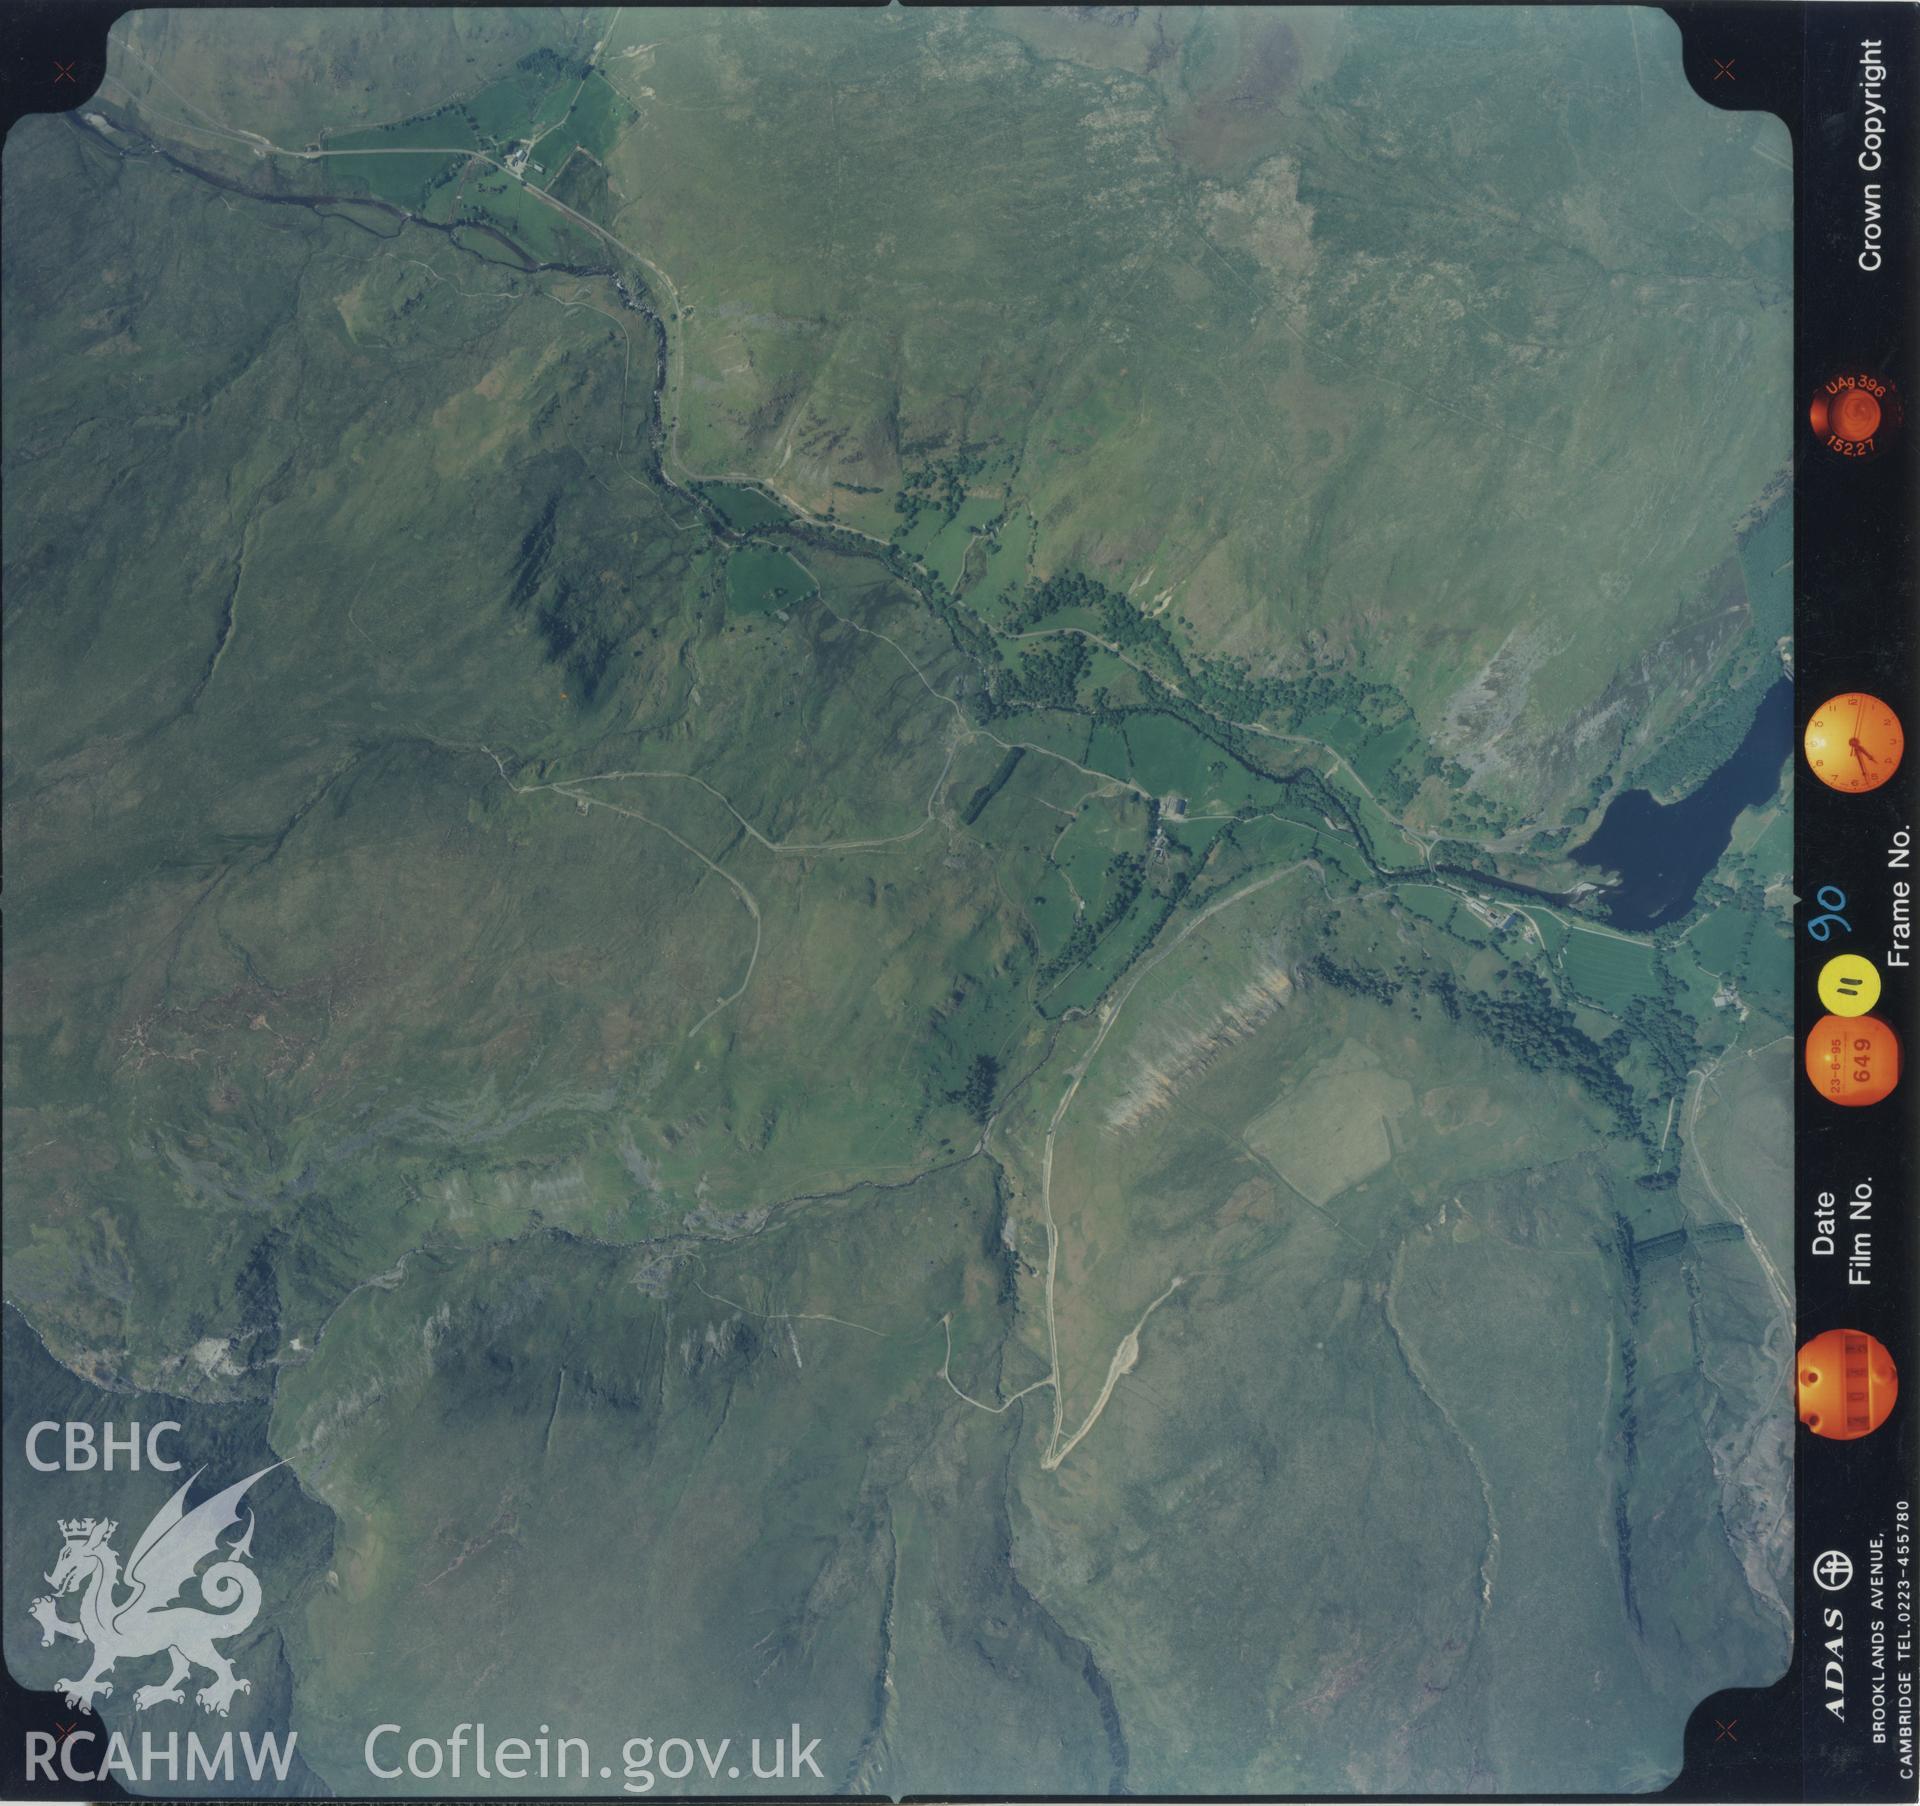 Aerial photograph of the Elan Valley, dated 1995. Included in material relating to Archaeological Desk Based Assessment of Afon Claerwen, Elan Valley, Rhayader, Powys. Assessment conducted by Archaeology Wales in 2017-18. Report no. 1633. Project no. 2573.